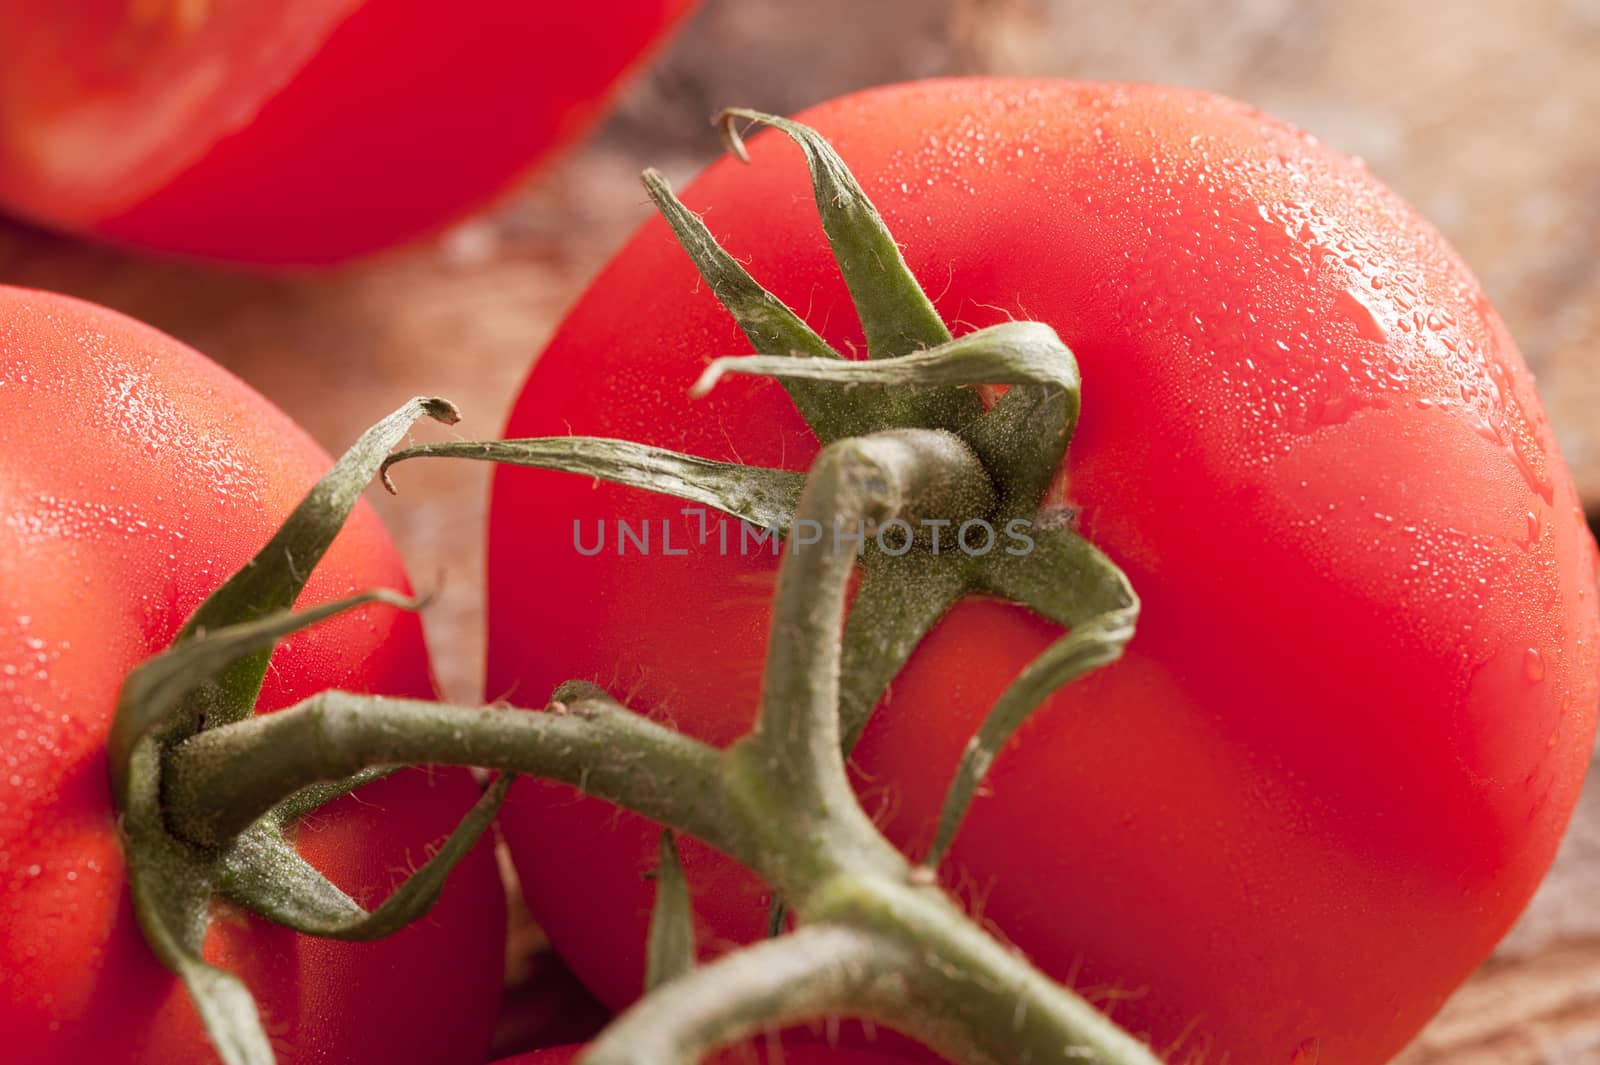 Detail close up on very ripe red tomatoes with green stems and moisture on the skin